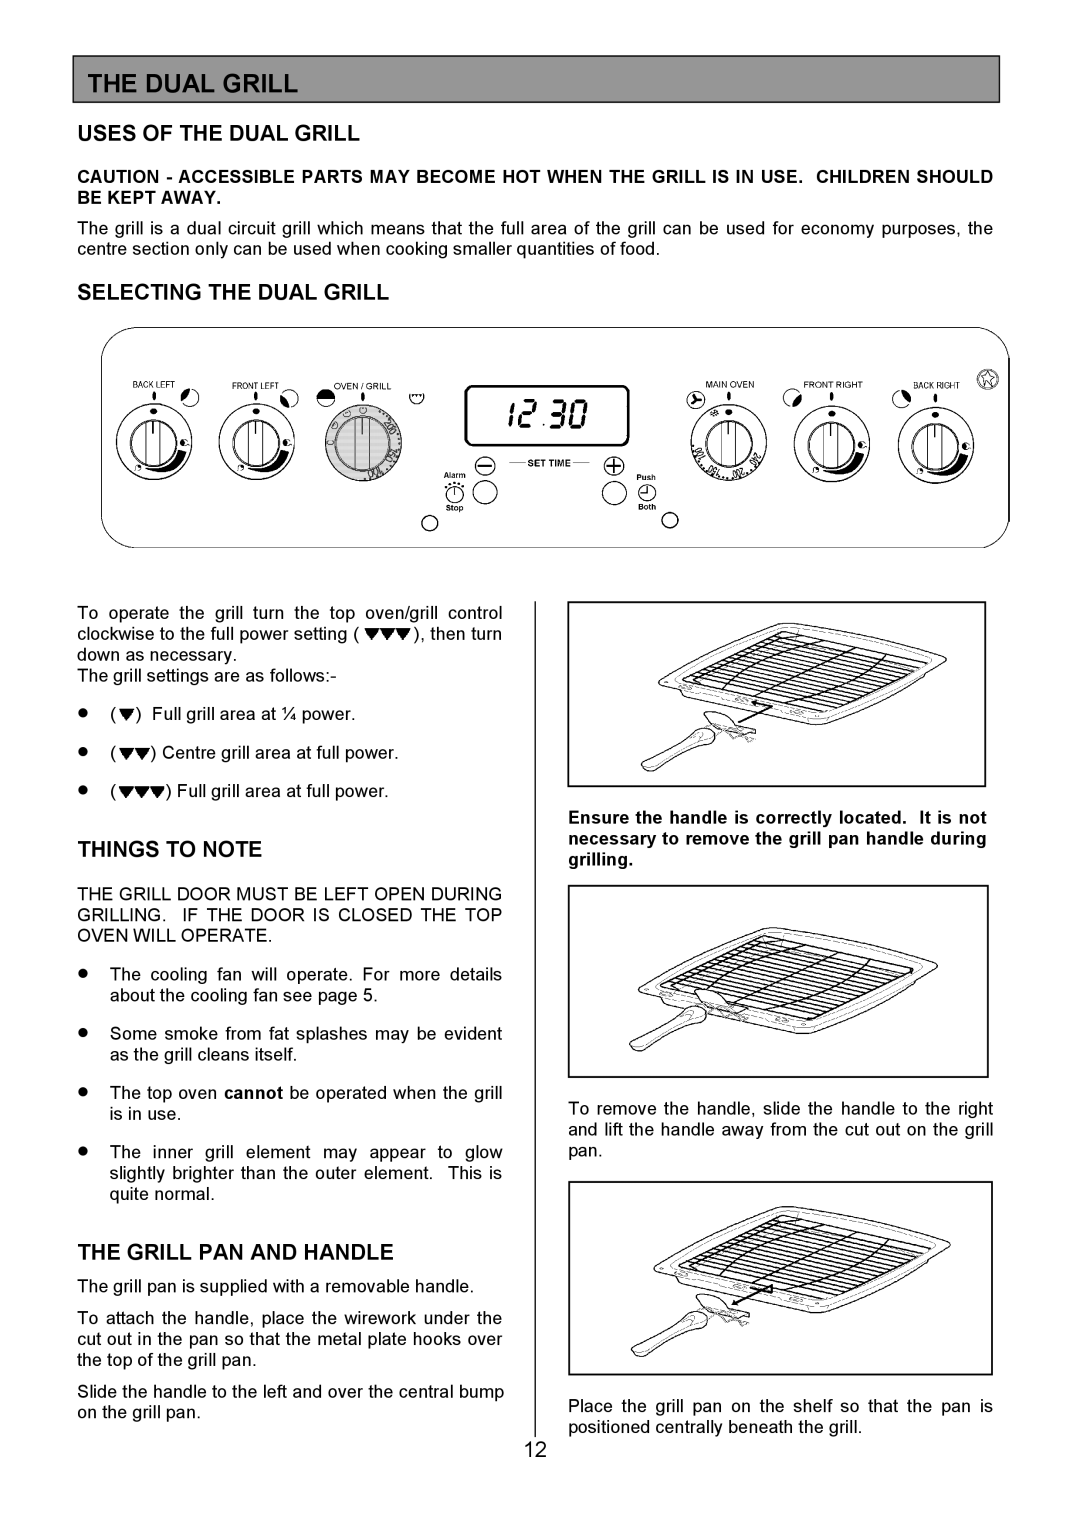 Electrolux SM 554 installation instructions Uses of the Dual Grill, Selecting the Dual Grill, Grill PAN and Handle 